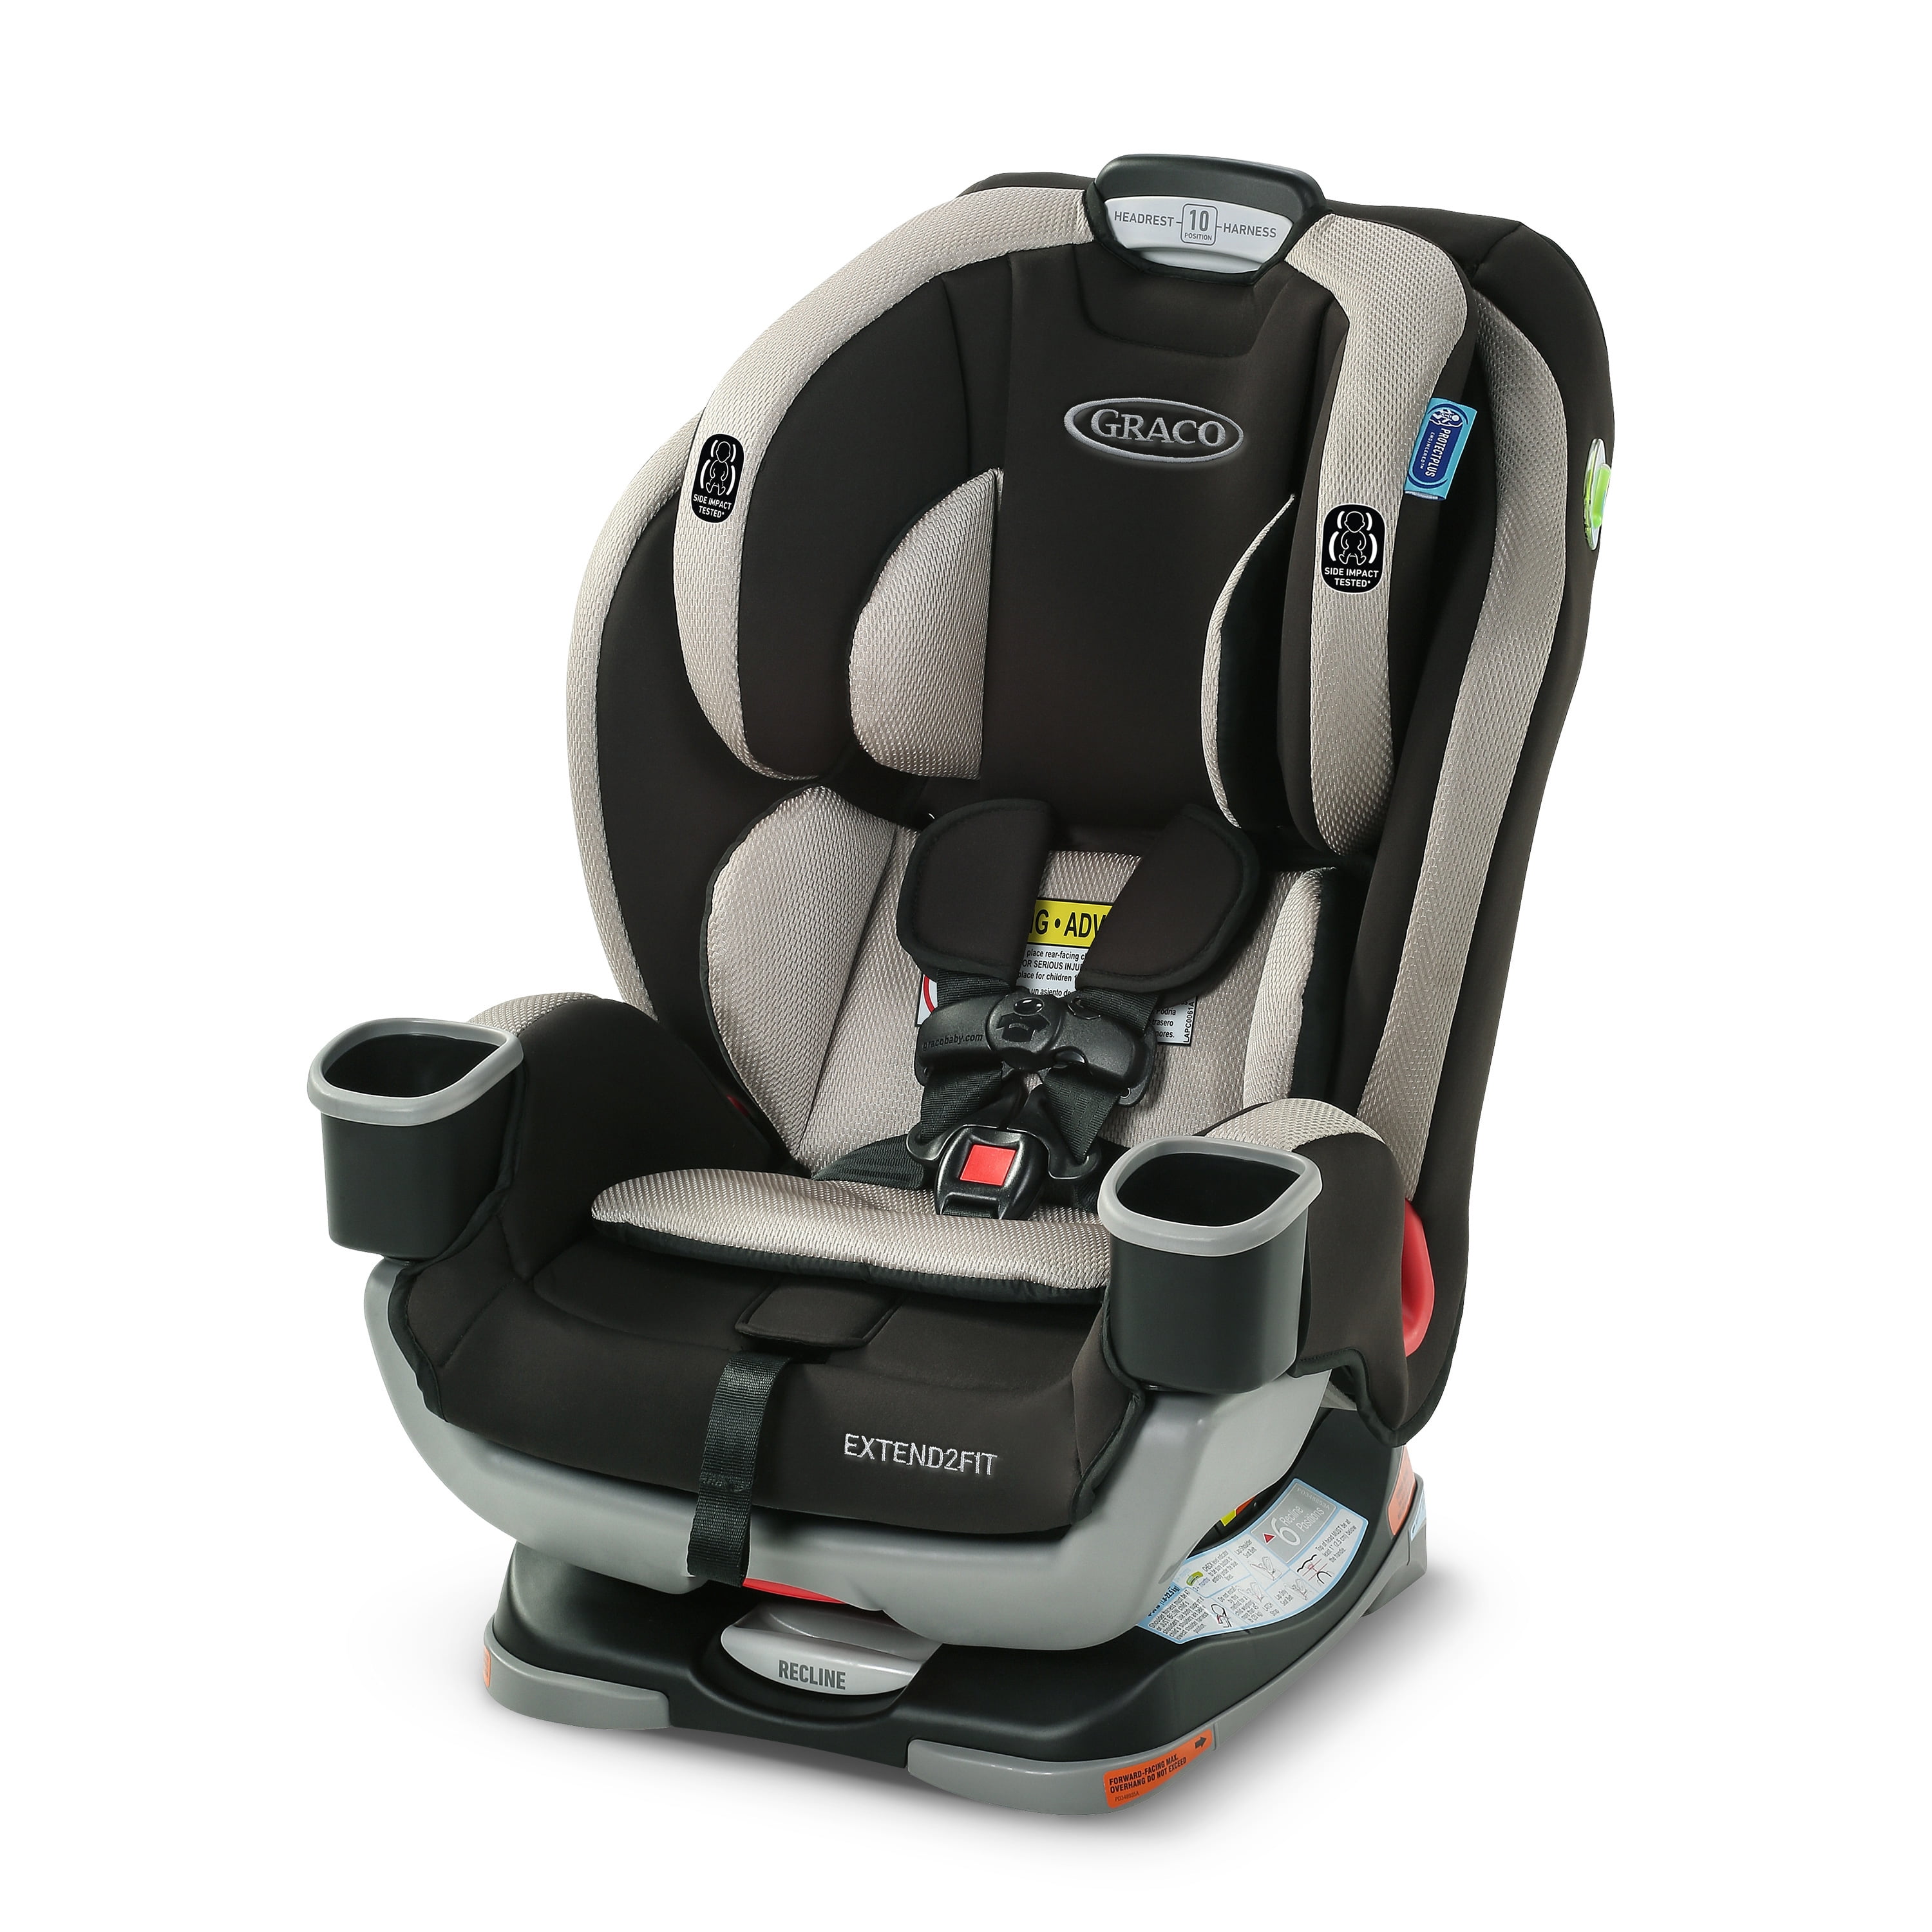 **** 22-36 kg Graco *** GRACO BOOSTER BASIC CAR SEAT Group 3 3 to 12 Years 